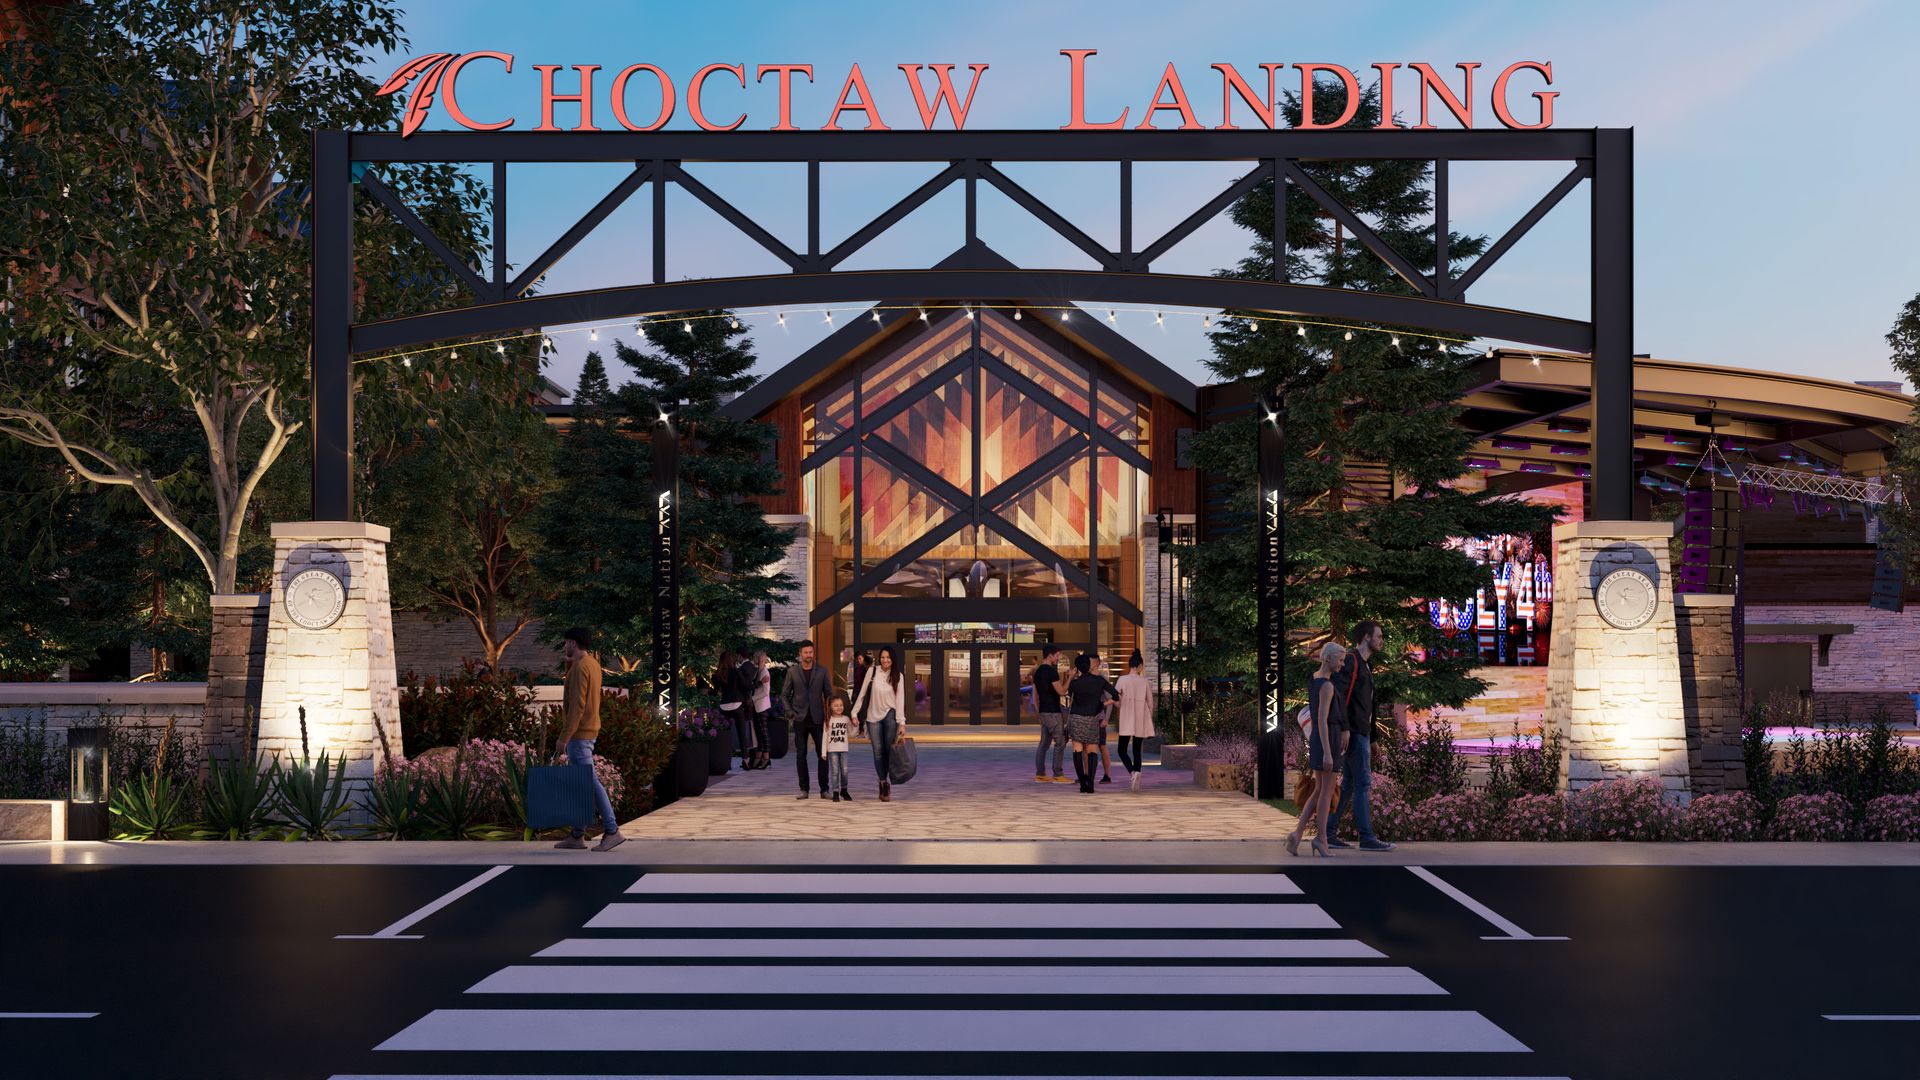 A rendering of the entrance of a resort in Oklahoma